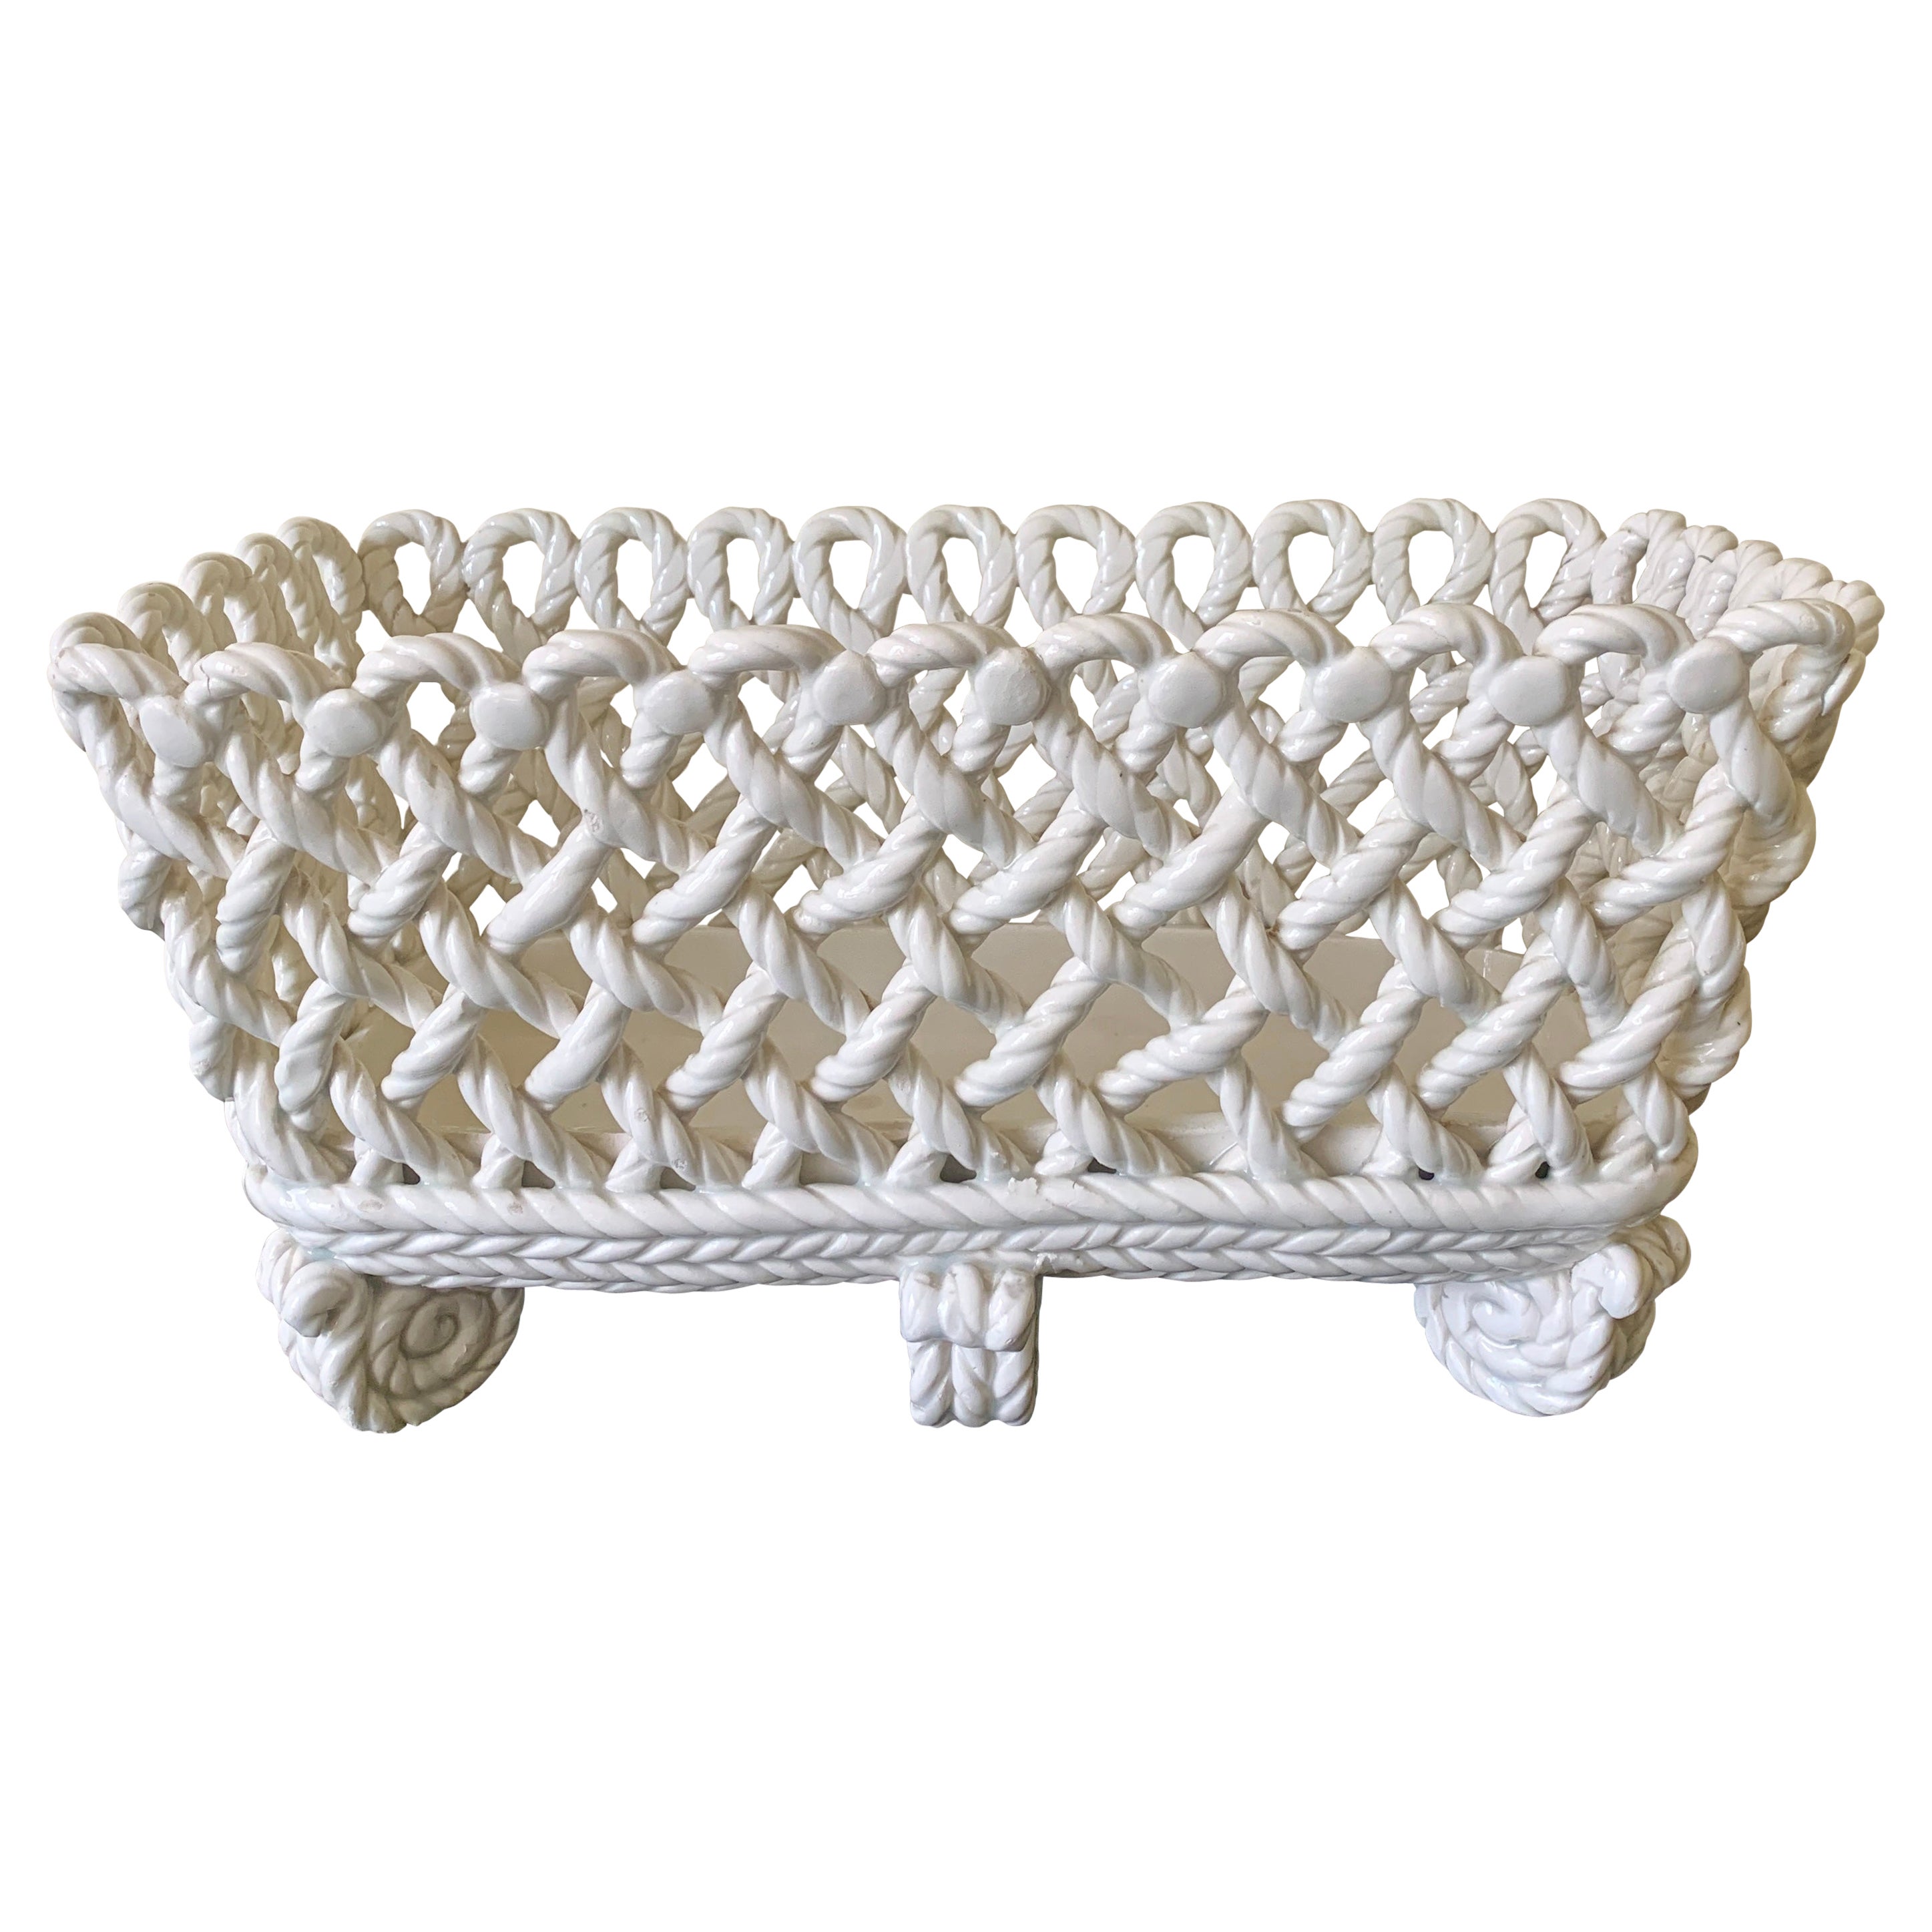 French Country White Ceramic Woven Rope Cachepot Basket For Sale